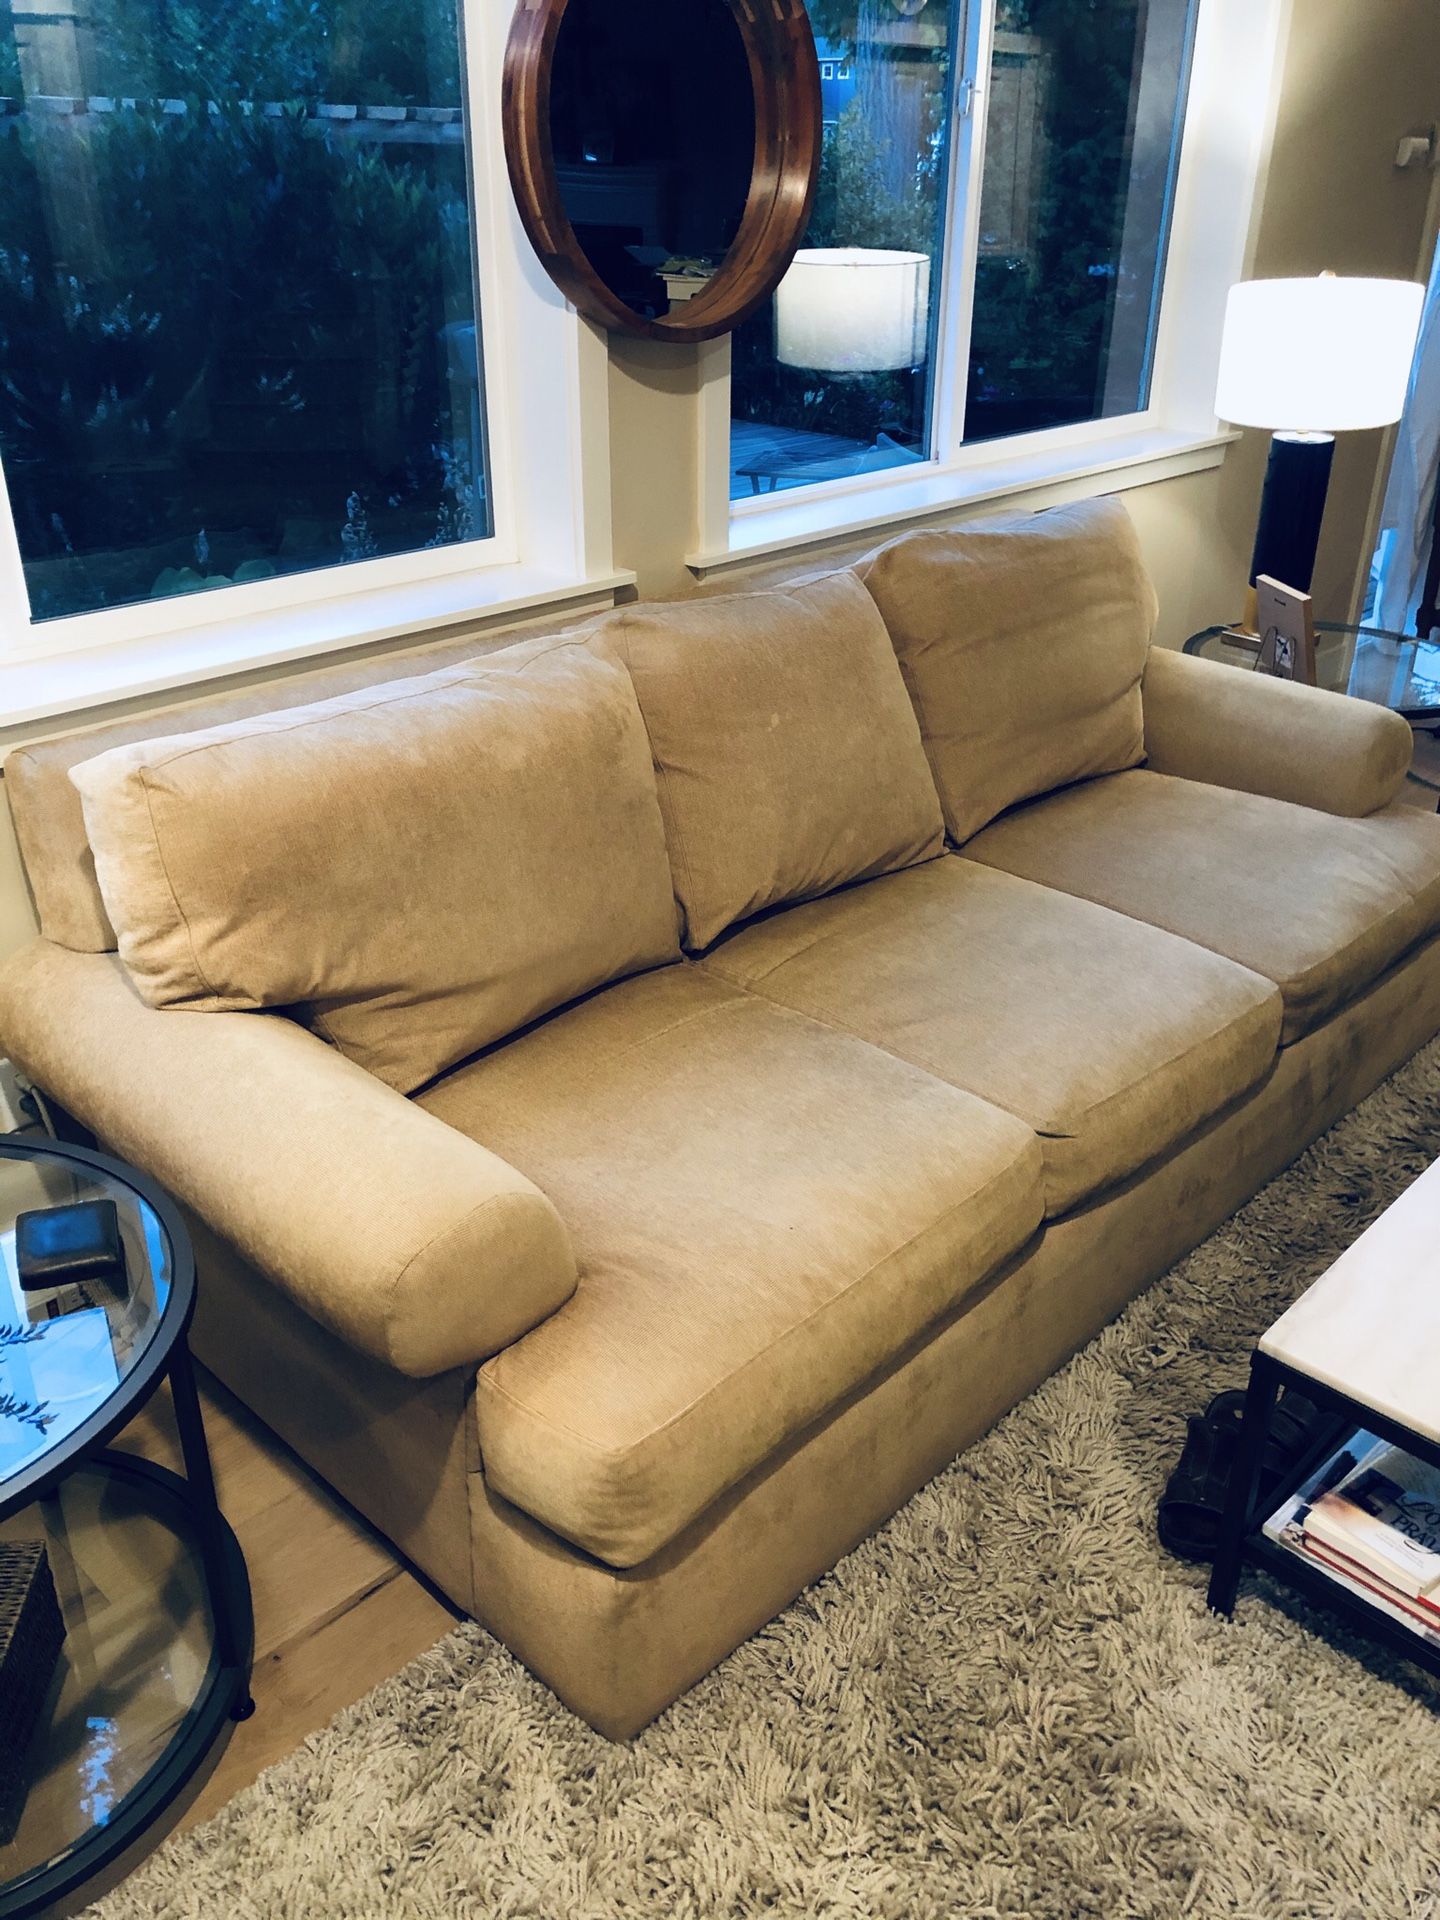 7foot Couch- Bernhardt with down filled cushions! Moving sale must go